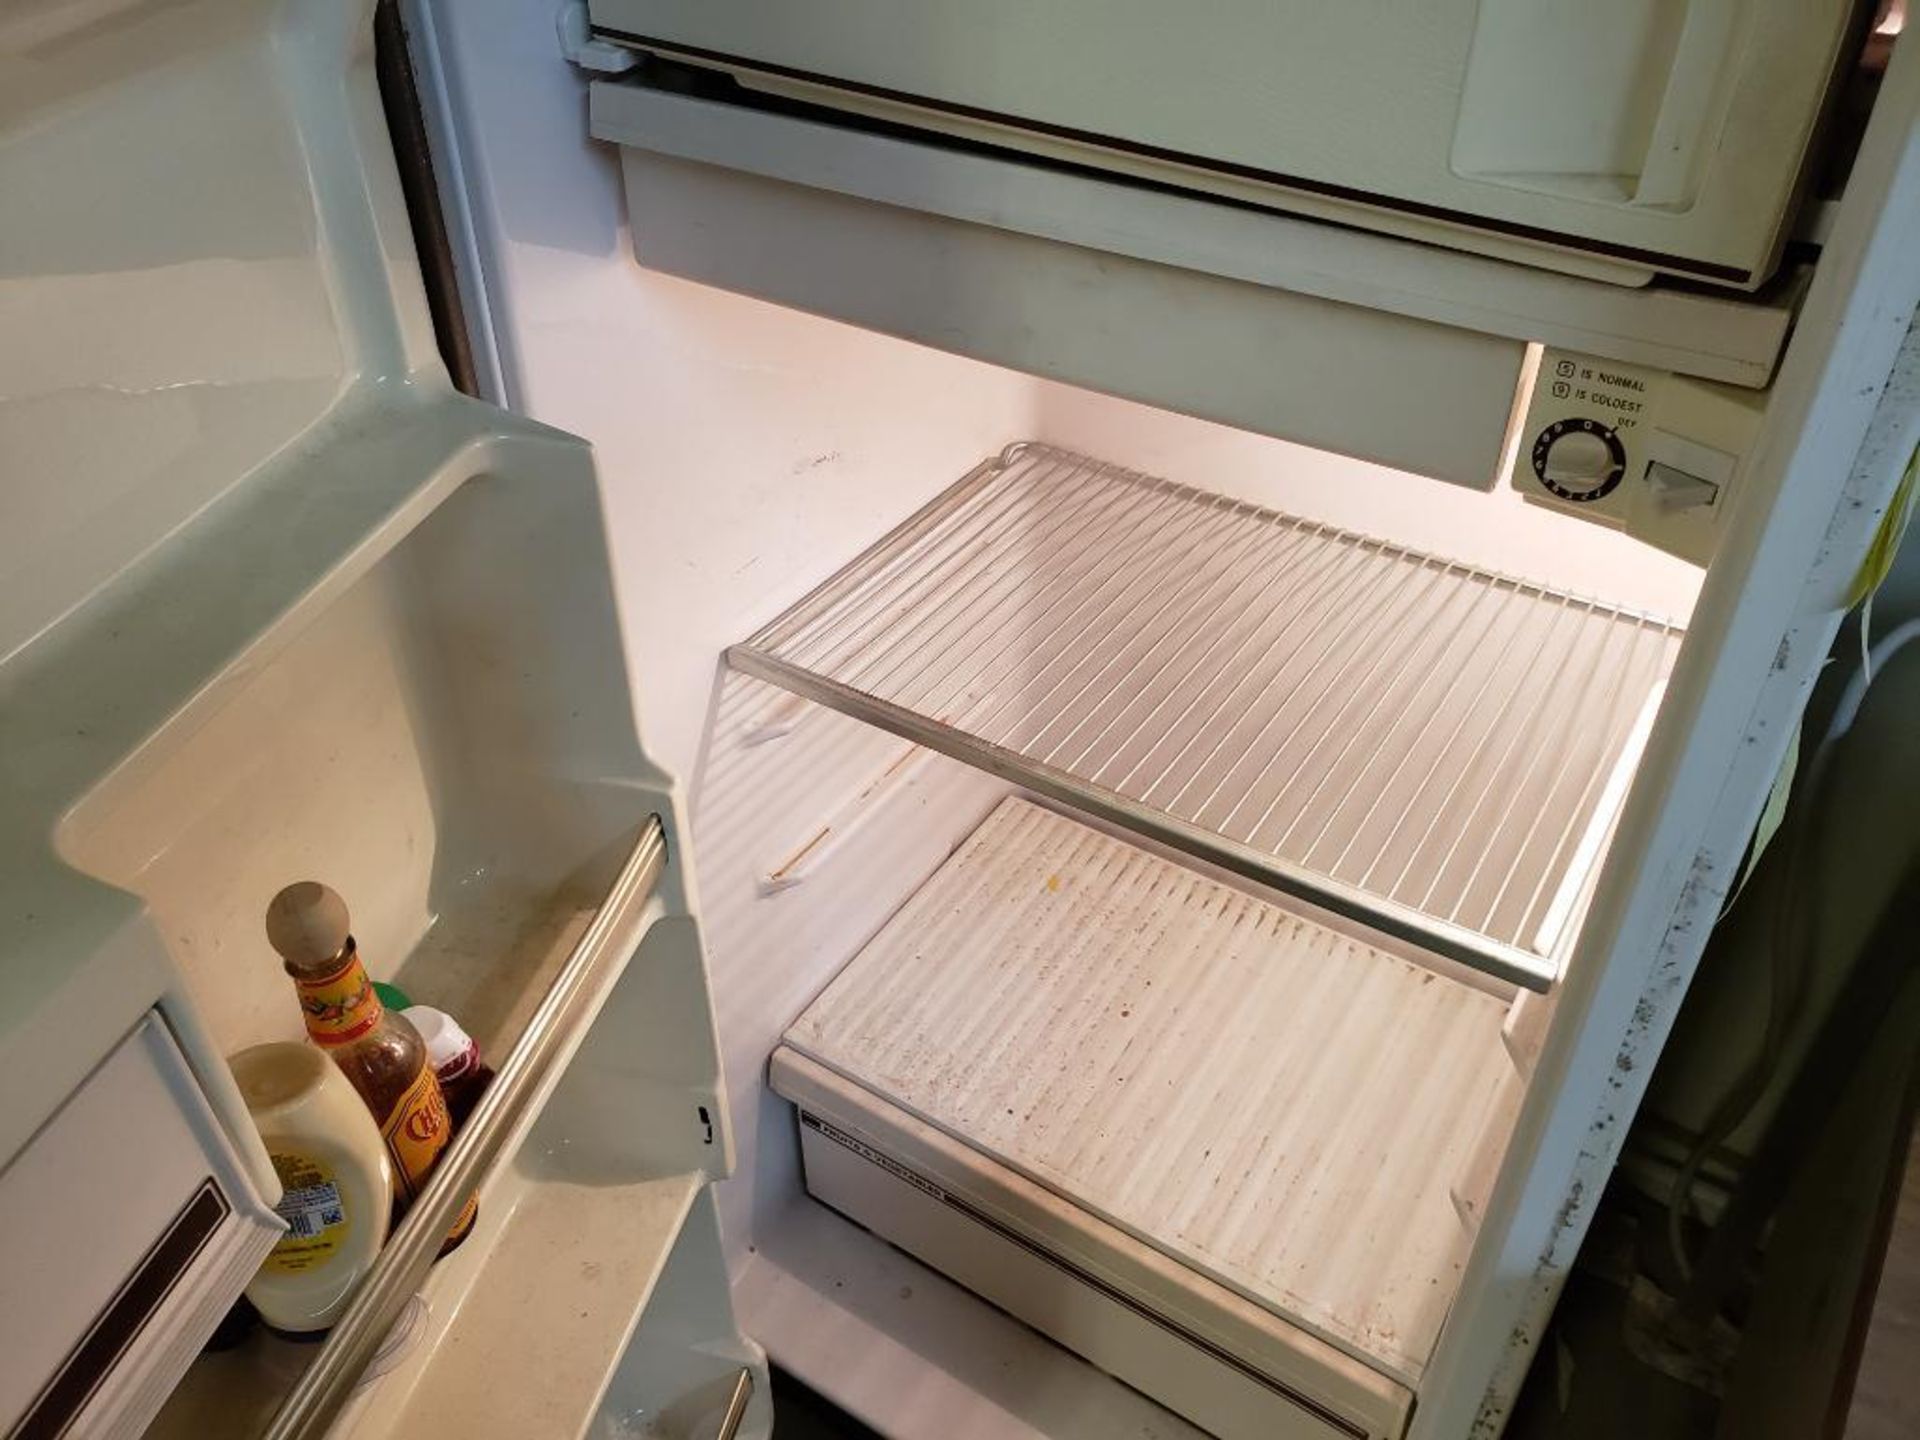 Refrigerator and microwave. - Image 4 of 4